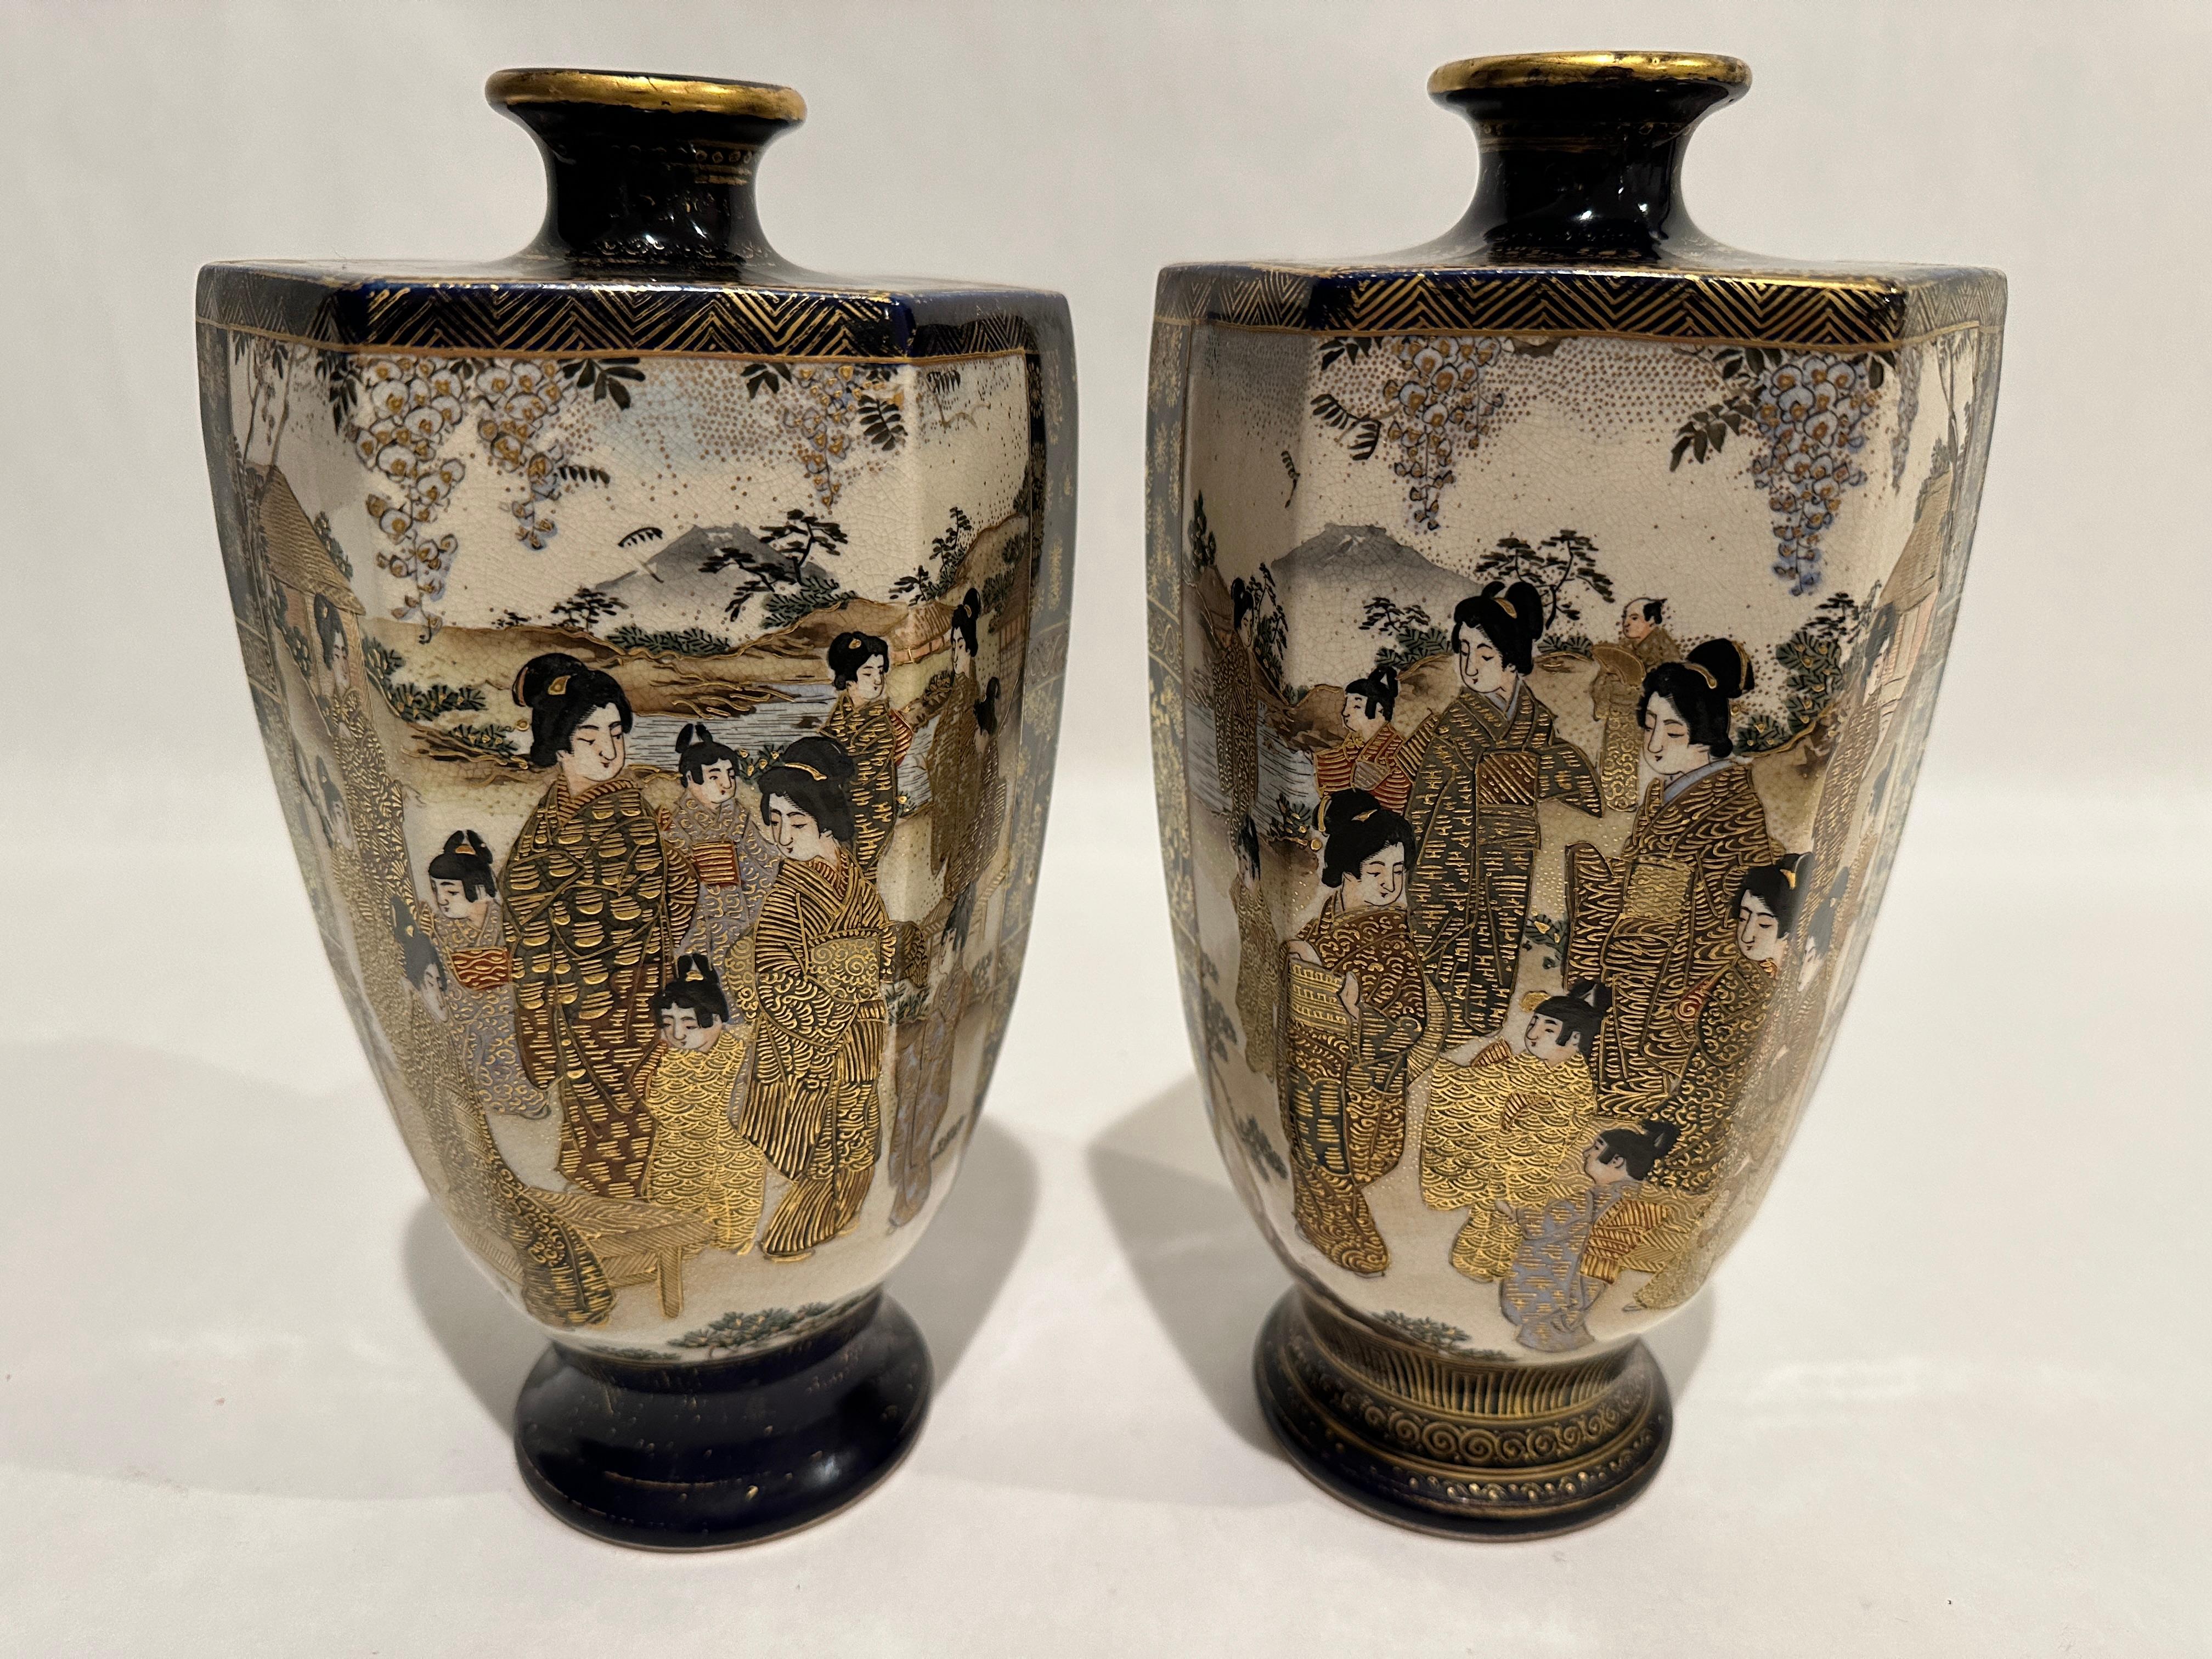 These are a very good quality pair of earthenware Japanese Satsuma vases, beautifully hand decorated and from the Meiji period, circa 1880. The vases have a hexangular shape raised on a circular foot, with a sharp shoulder and a small neck and